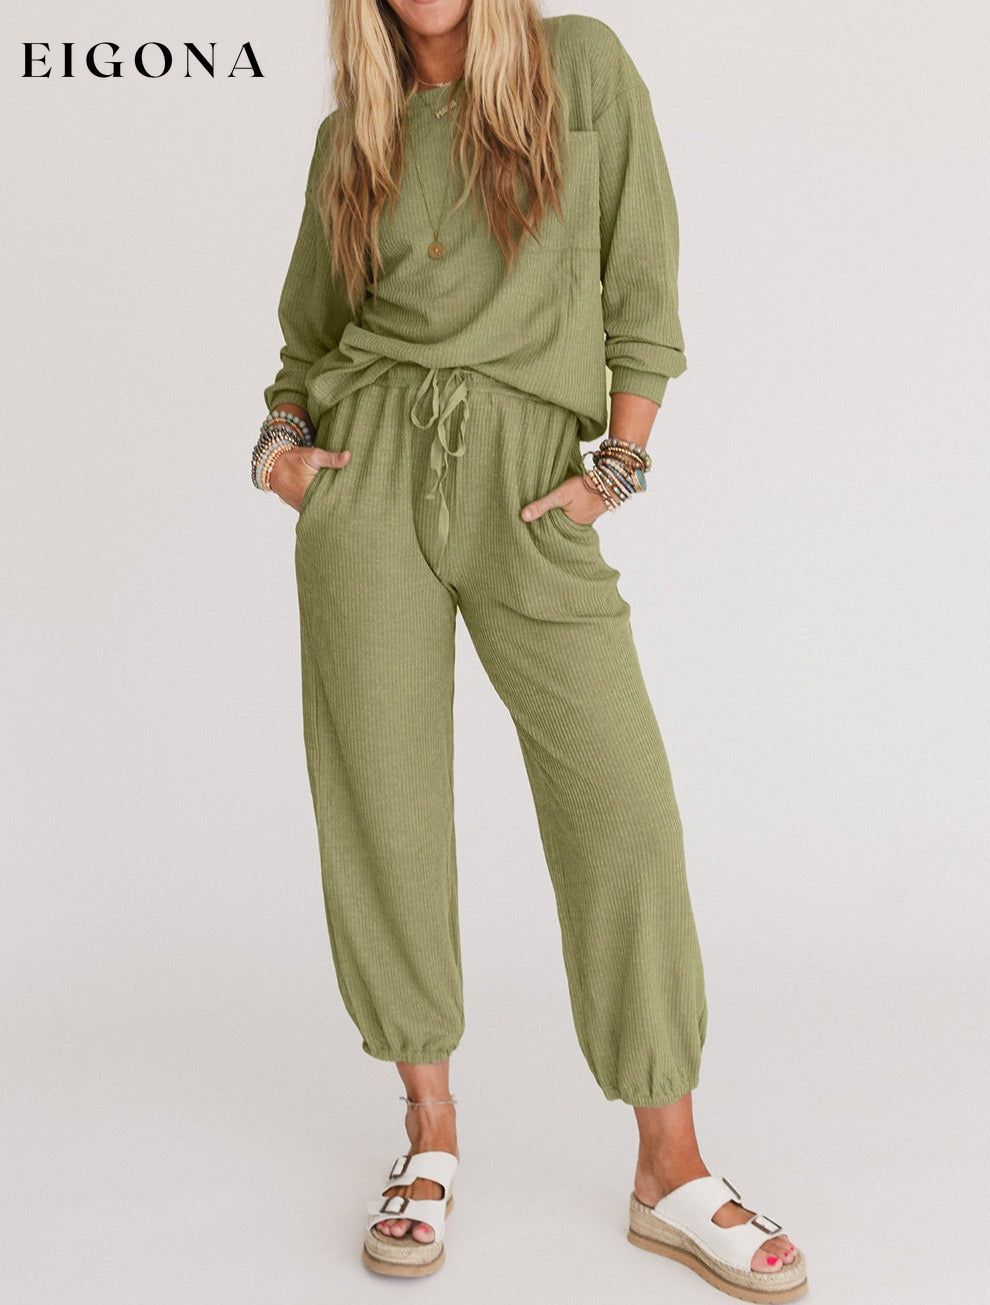 Long Sleeve Top Drawstring Joggers Set (Top and Bottoms included) All In Stock clothes Color Green lounge wear sets loungewear sets Occasion Home Print Solid Color Season Winter sets Style Casual